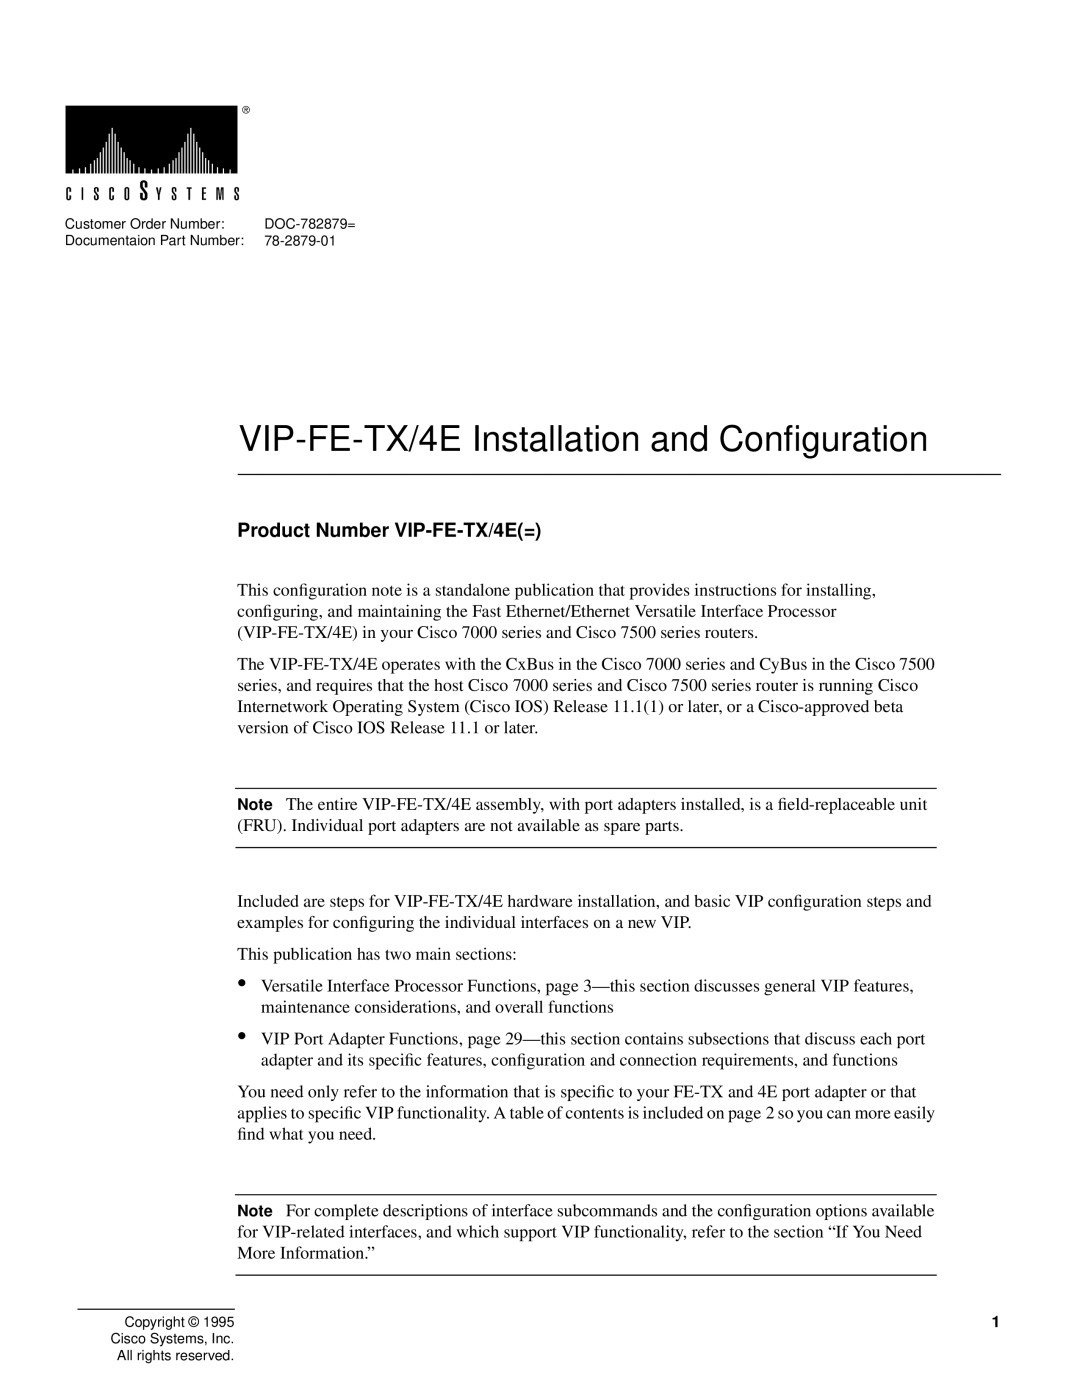 Cisco Systems manual VIP-FE-TX/4E Installation and Conﬁguration, Product Number VIP-FE-TX/4E= 